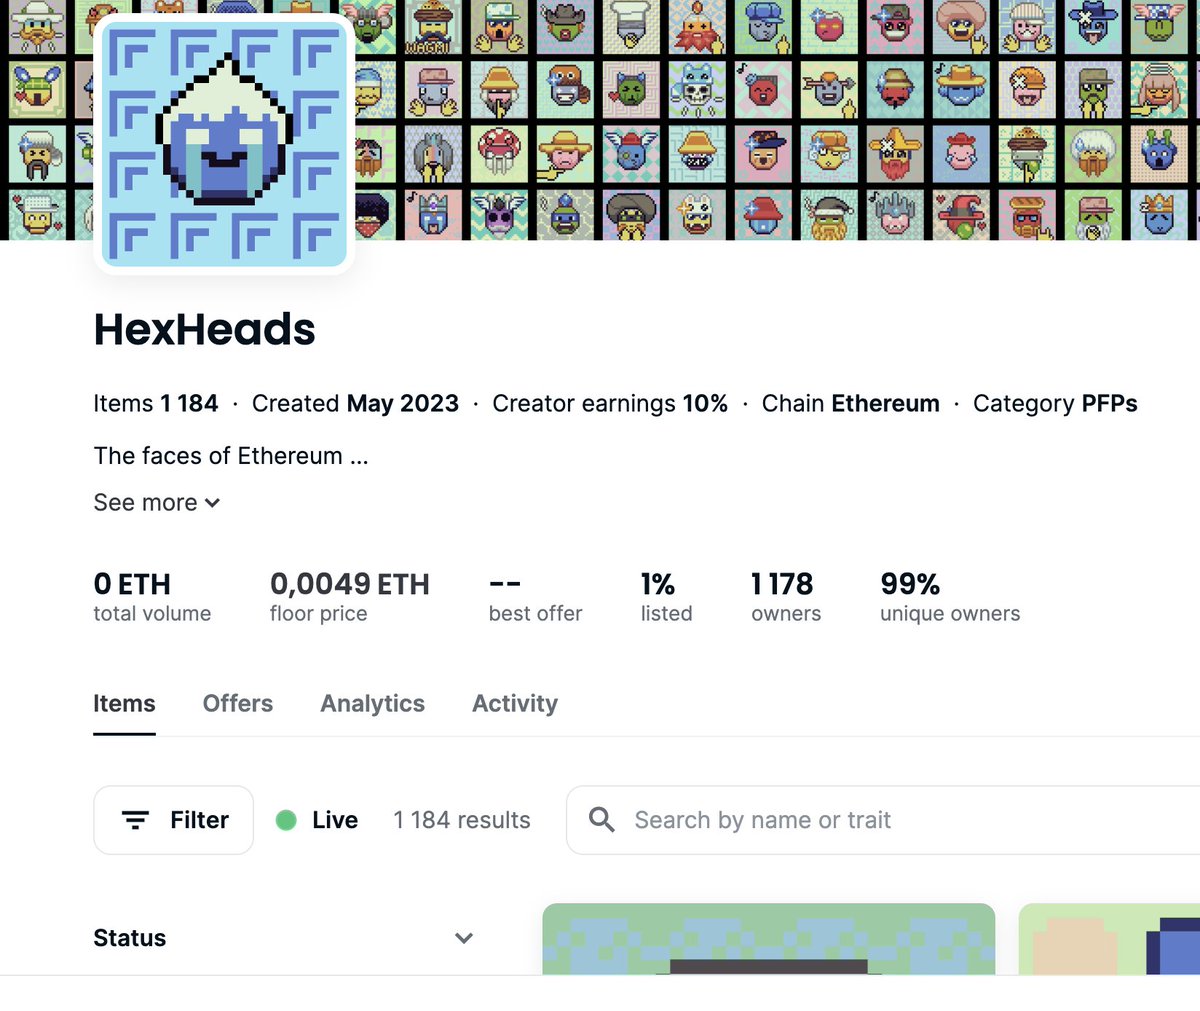 More than 1K HexHeads were minted! Thanks, fam! How long do you think it would take for 10k mints?🌐 #Web3 #DAO #NFTCommunity #NFTGiveaway #NFTdrop #NFT #NFTcollections #ETH #AirdropCrypto #FreeMint